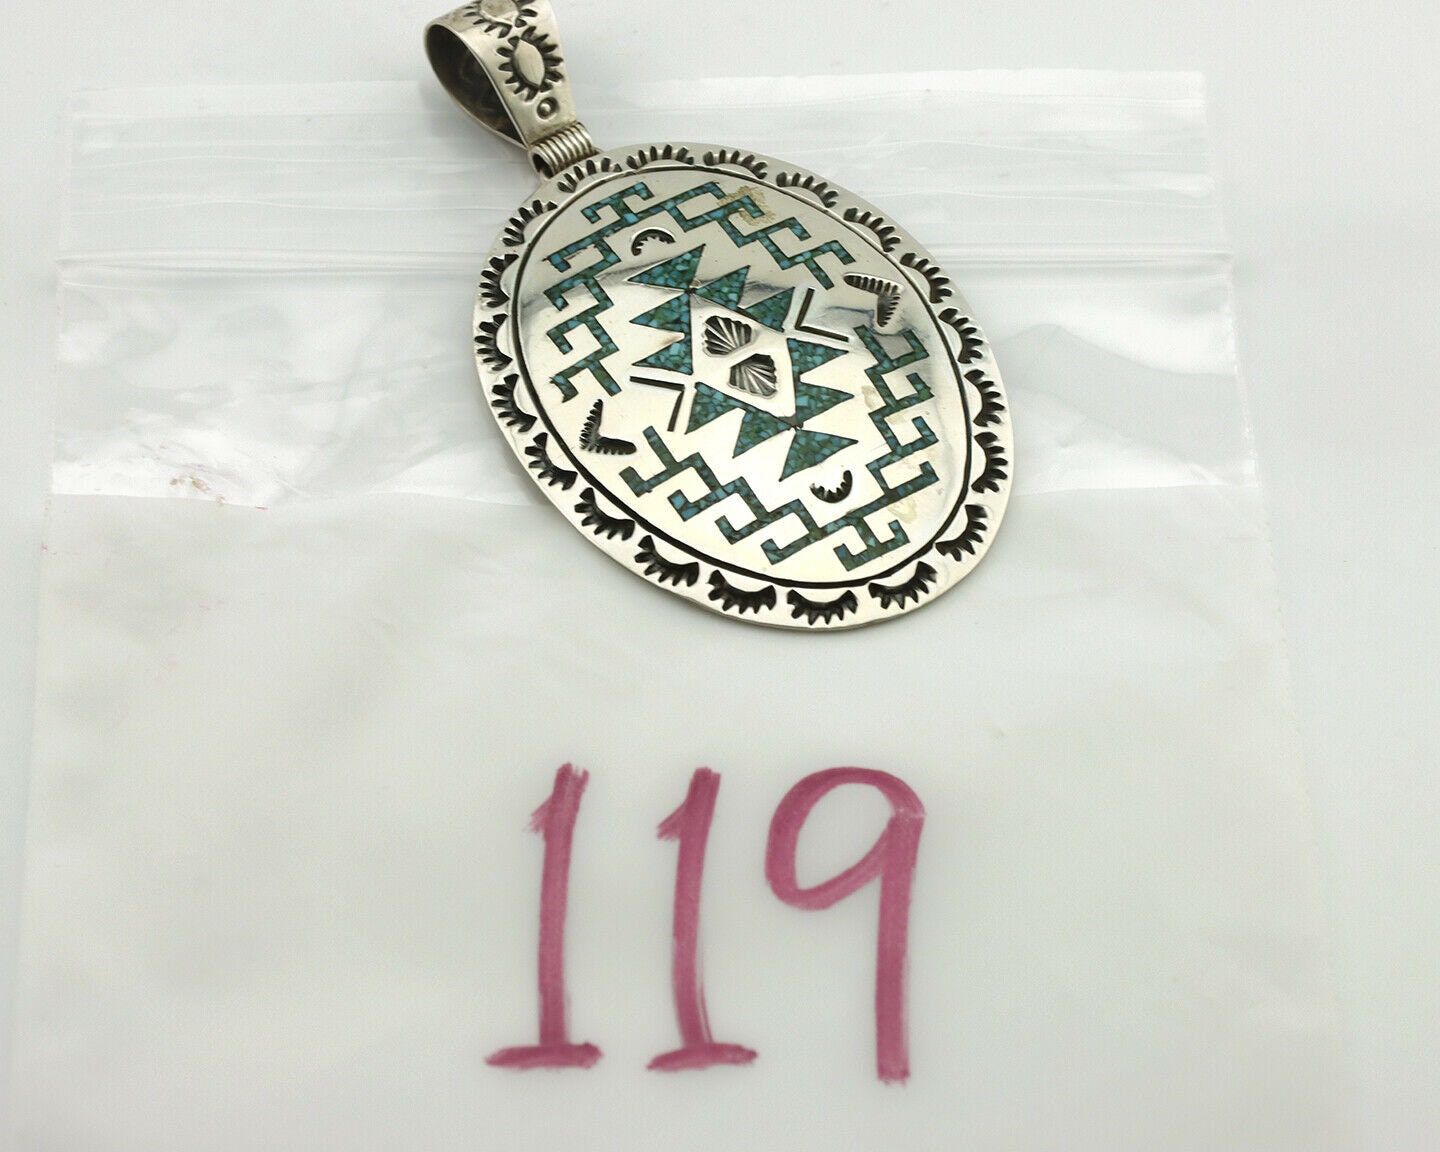 Stanley Bain, Navajo vintage sterling silver and Turquoise Pendant with 17  inch chain P495